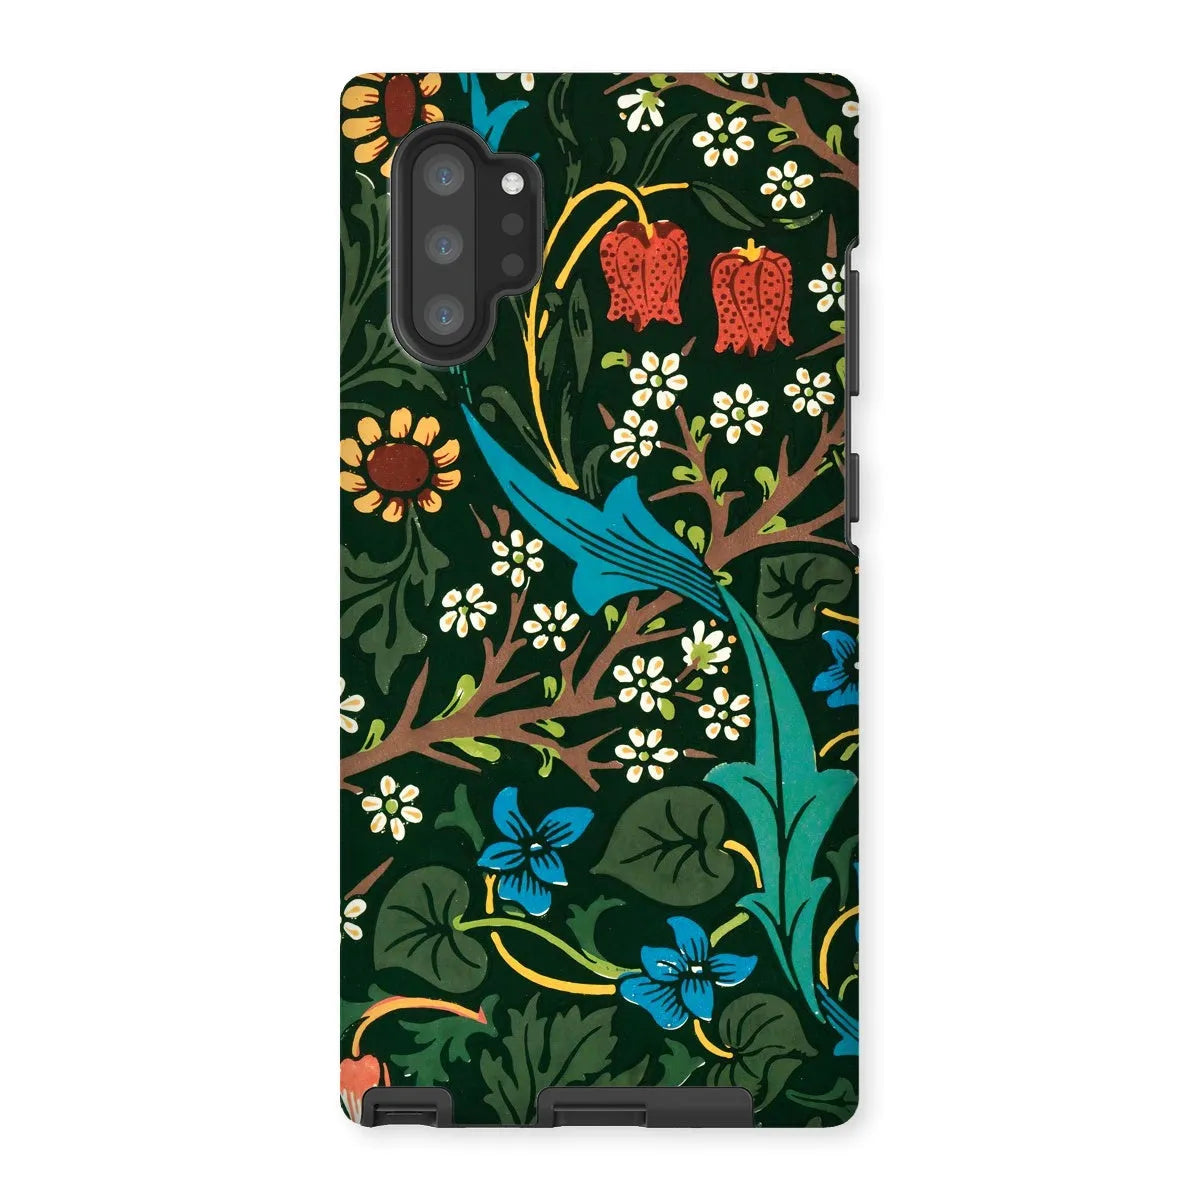 Blackthorn Hawthorn - Floral Phone Case - William Morris - Samsung Galaxy Note 10p / Matte - Mobile Phone Cases